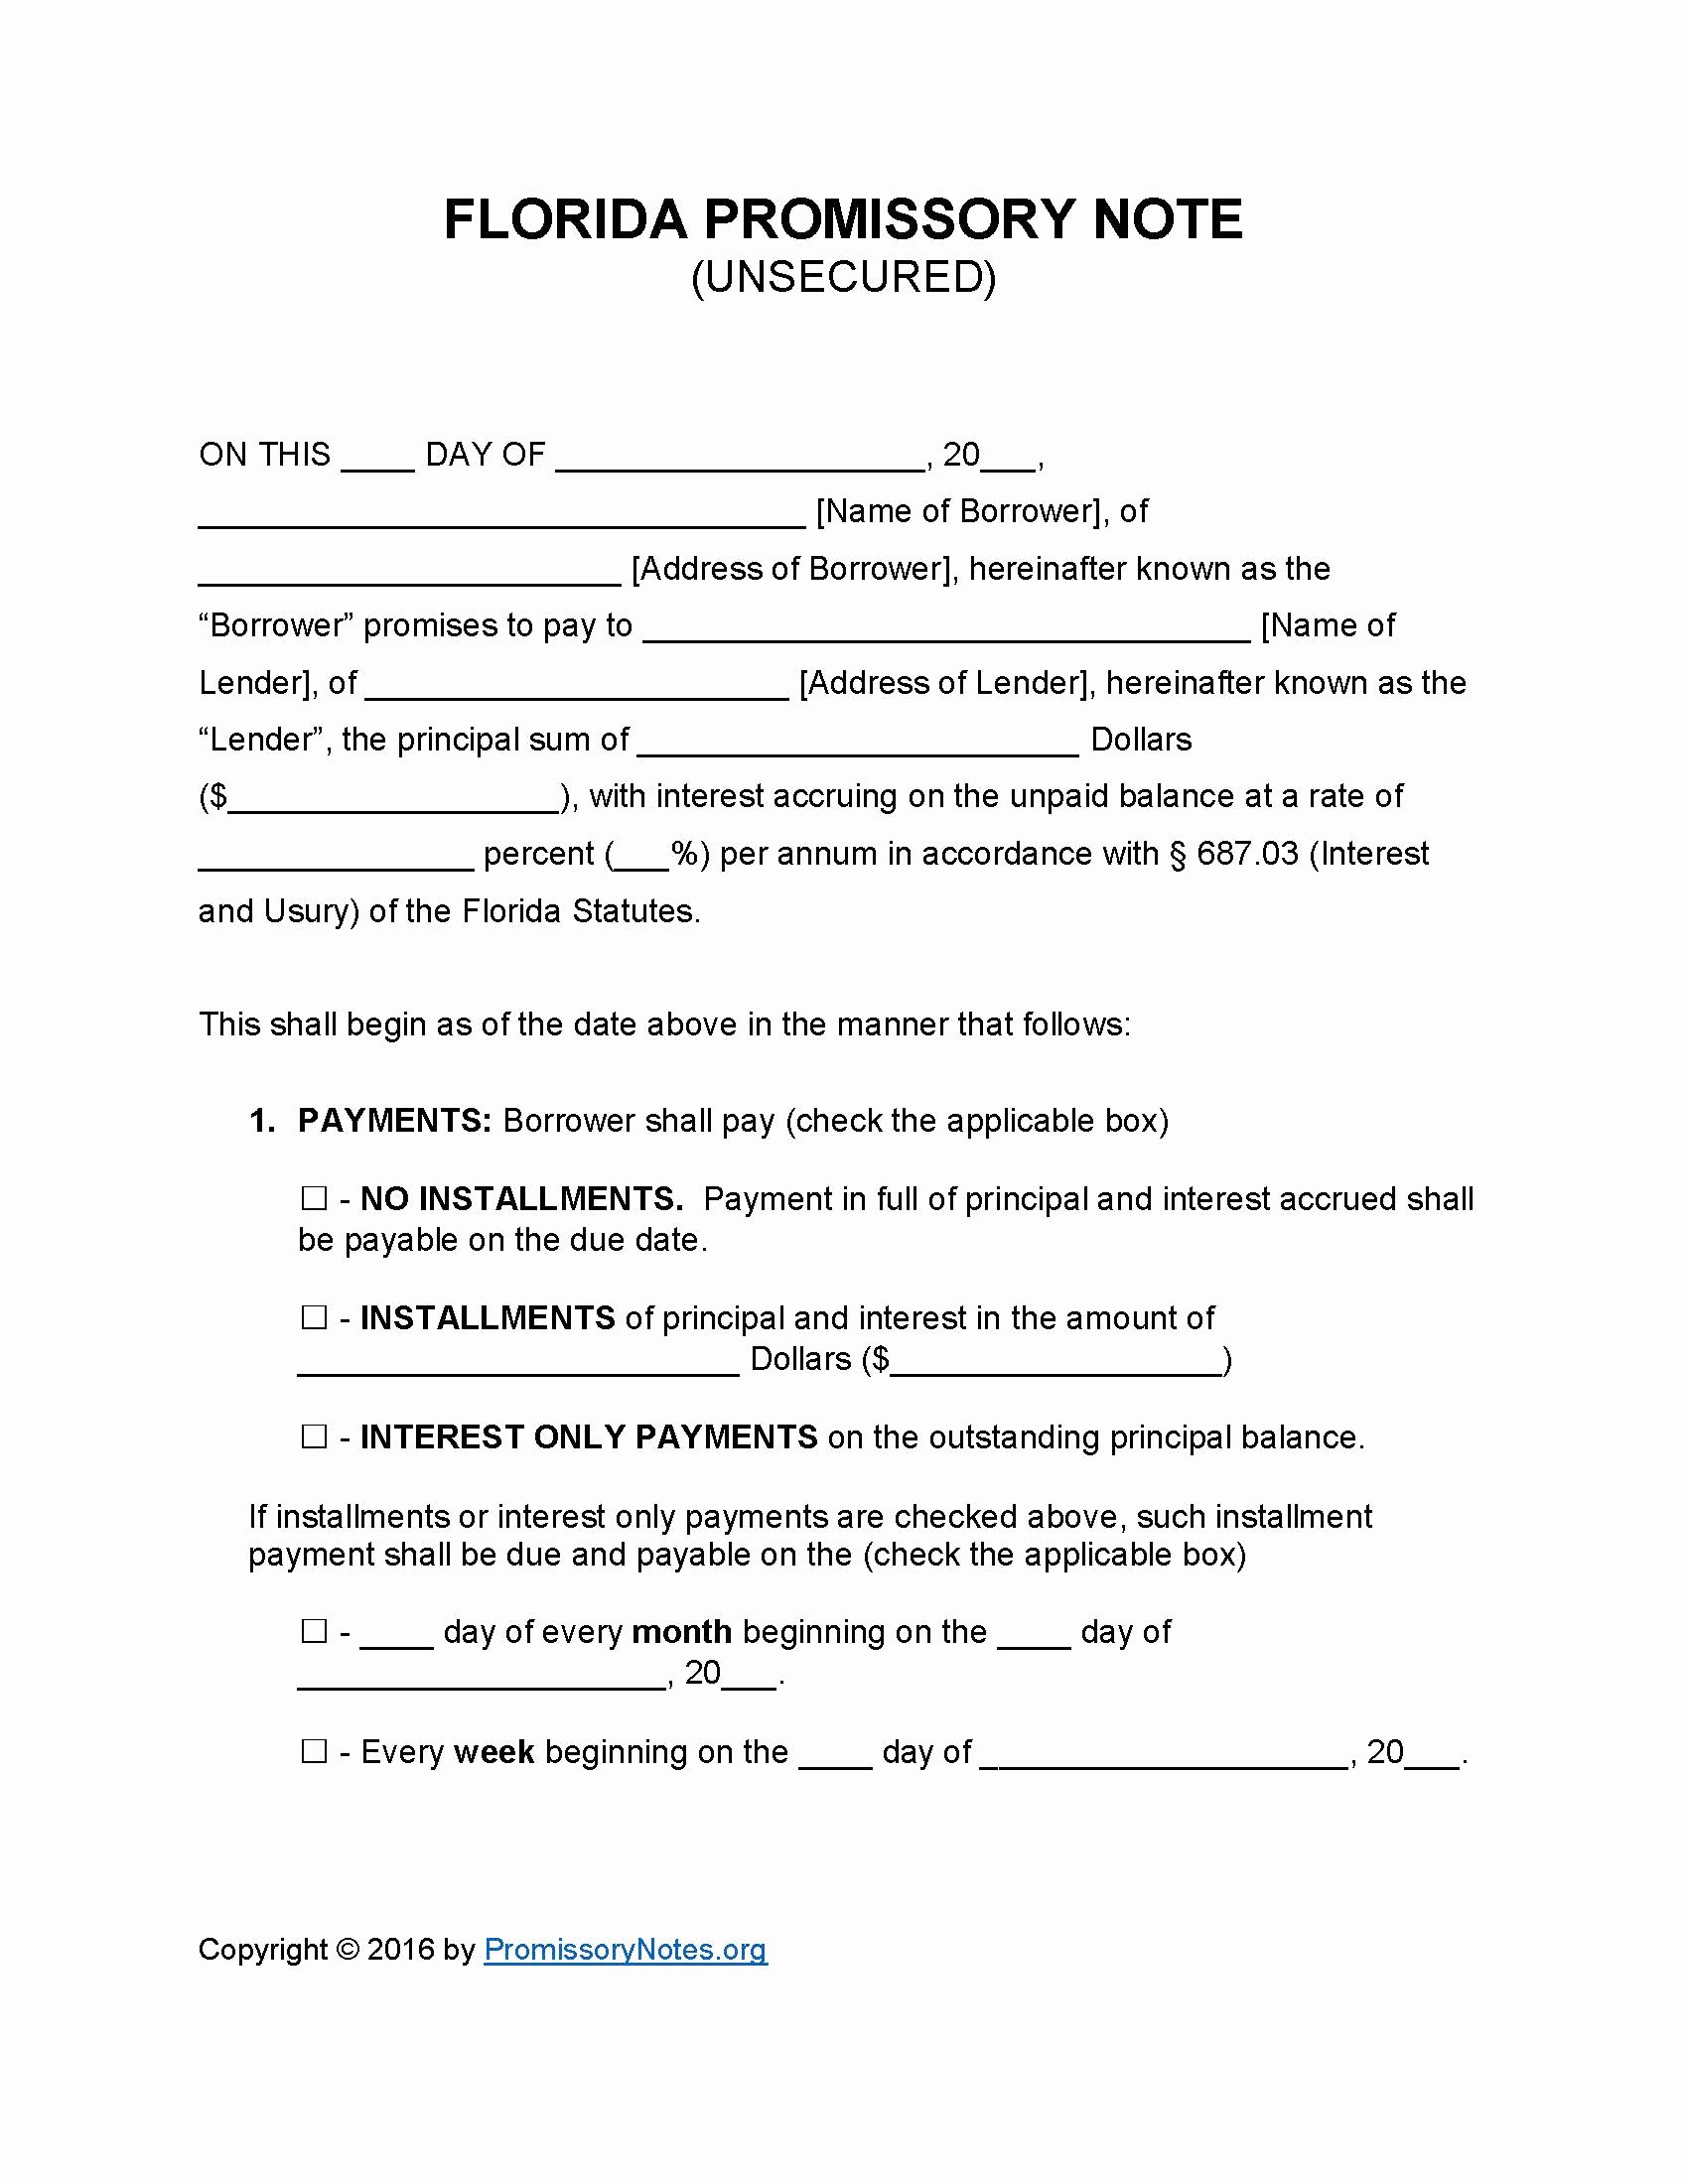 Promissory Note Template Florida Awesome Florida Unsecured Promissory Note Template Promissory